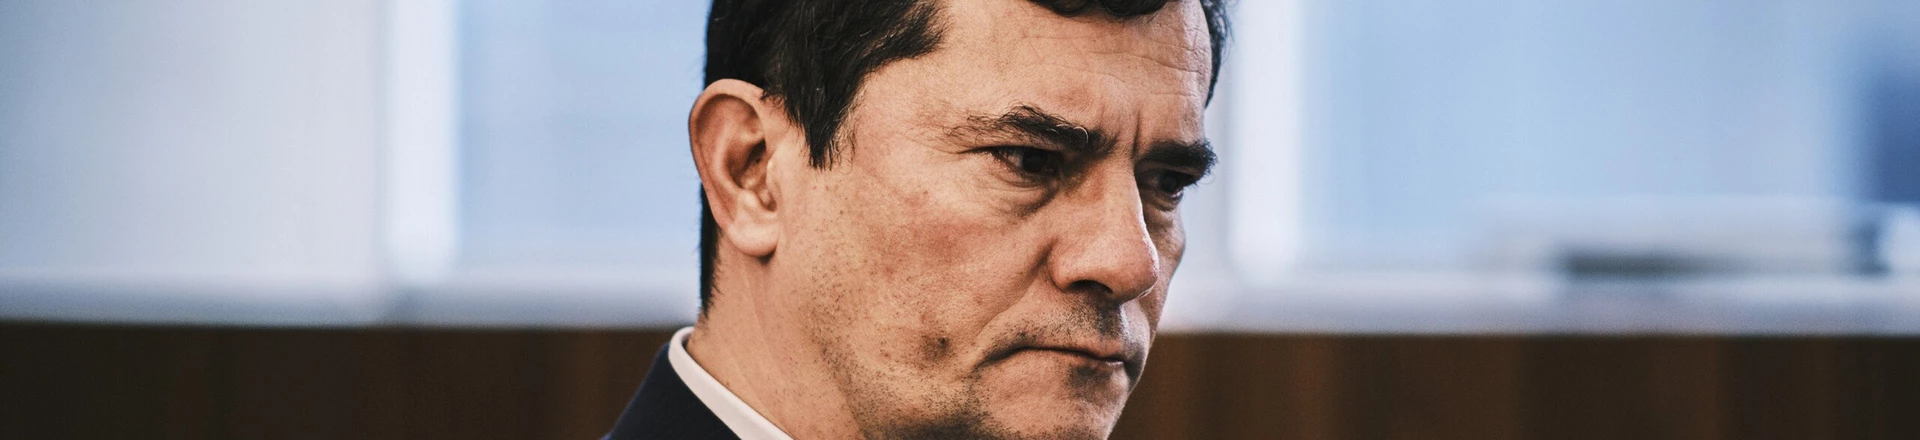 Sergio Moro, former Carwash corruption probe judge, during an interview in Brasilia, Brazil, on Wednesday, Nov. 17, 2021. As a star judge, Moro jailed scores of politicians and business leaders during Brazils explosive Carwash corruption probe. Photographer: Gustavo Minas/Bloomberg via Getty Images